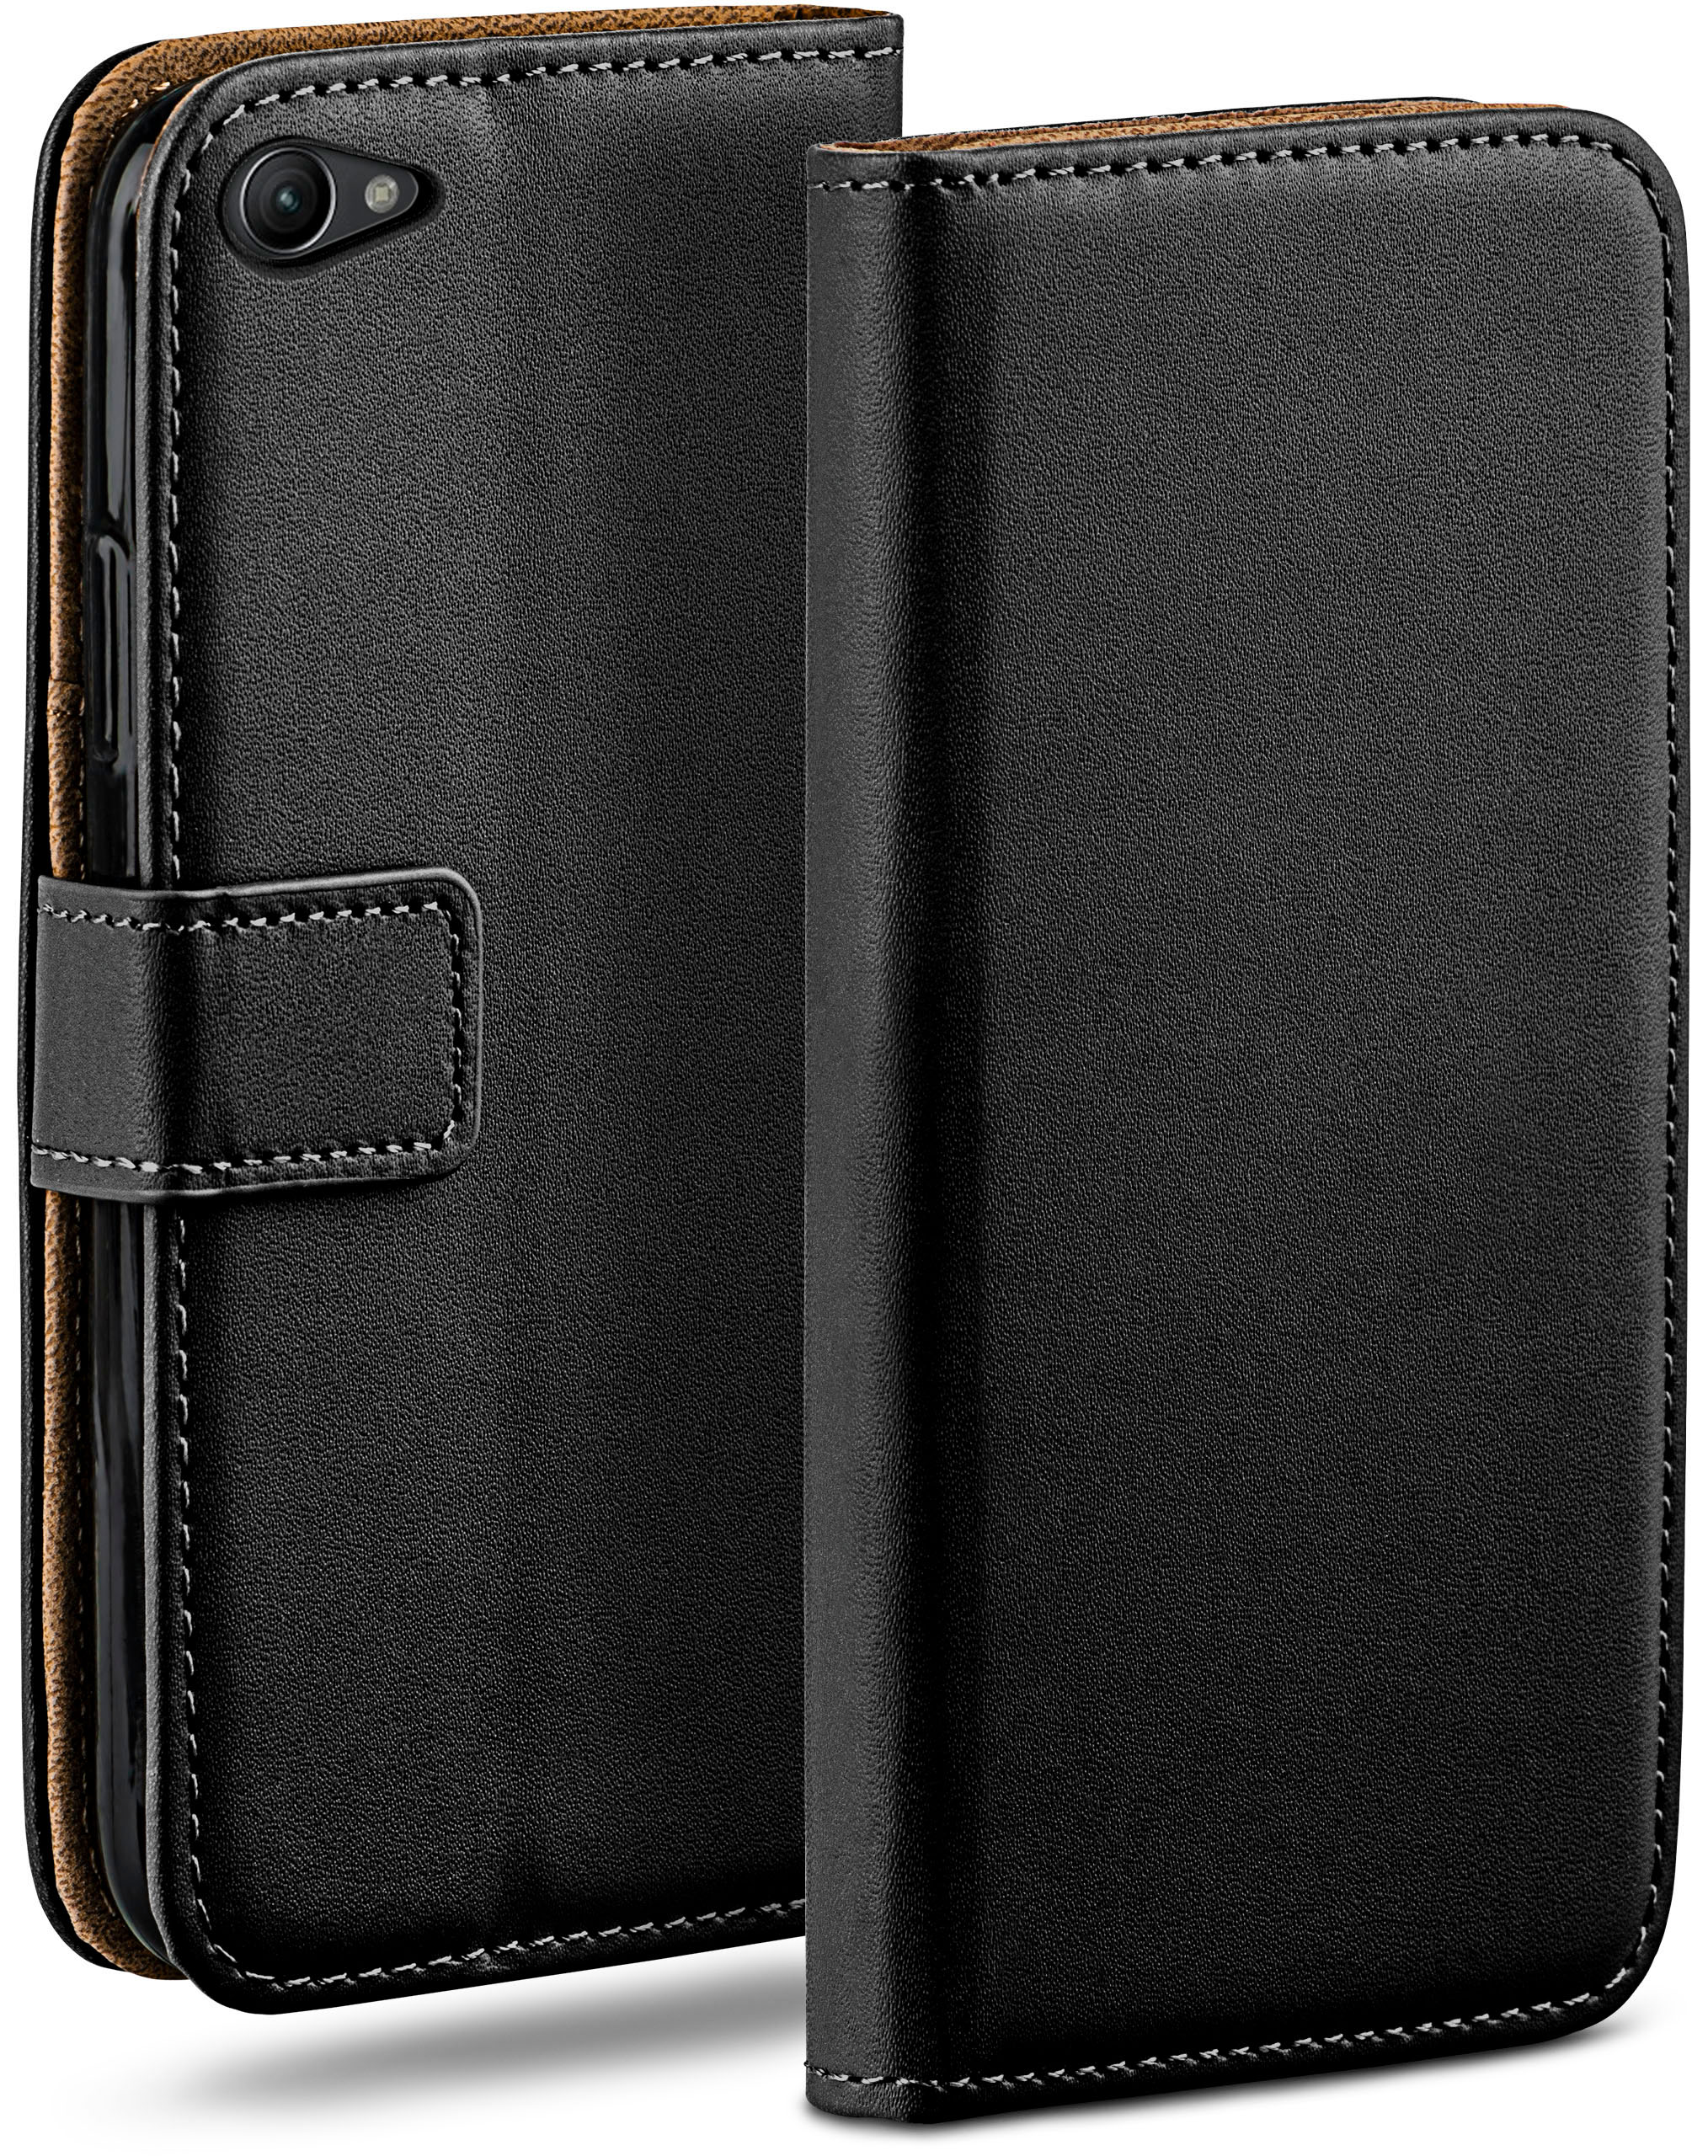 Compact, MOEX Xperia Deep-Black Case, Bookcover, Book Sony, Z1